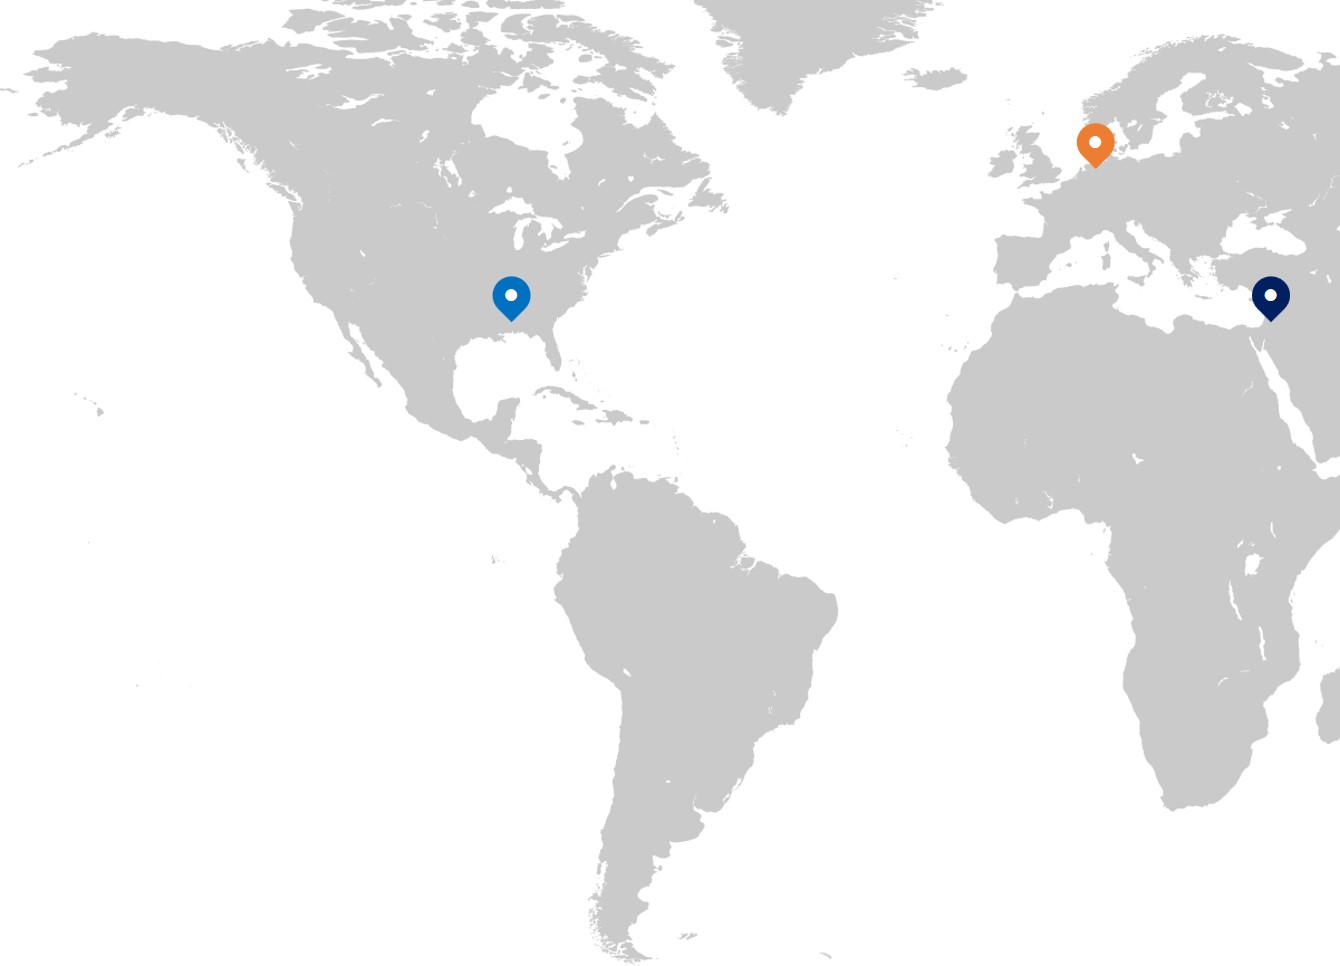 Offices in the United States, Israel, and The Netherlands